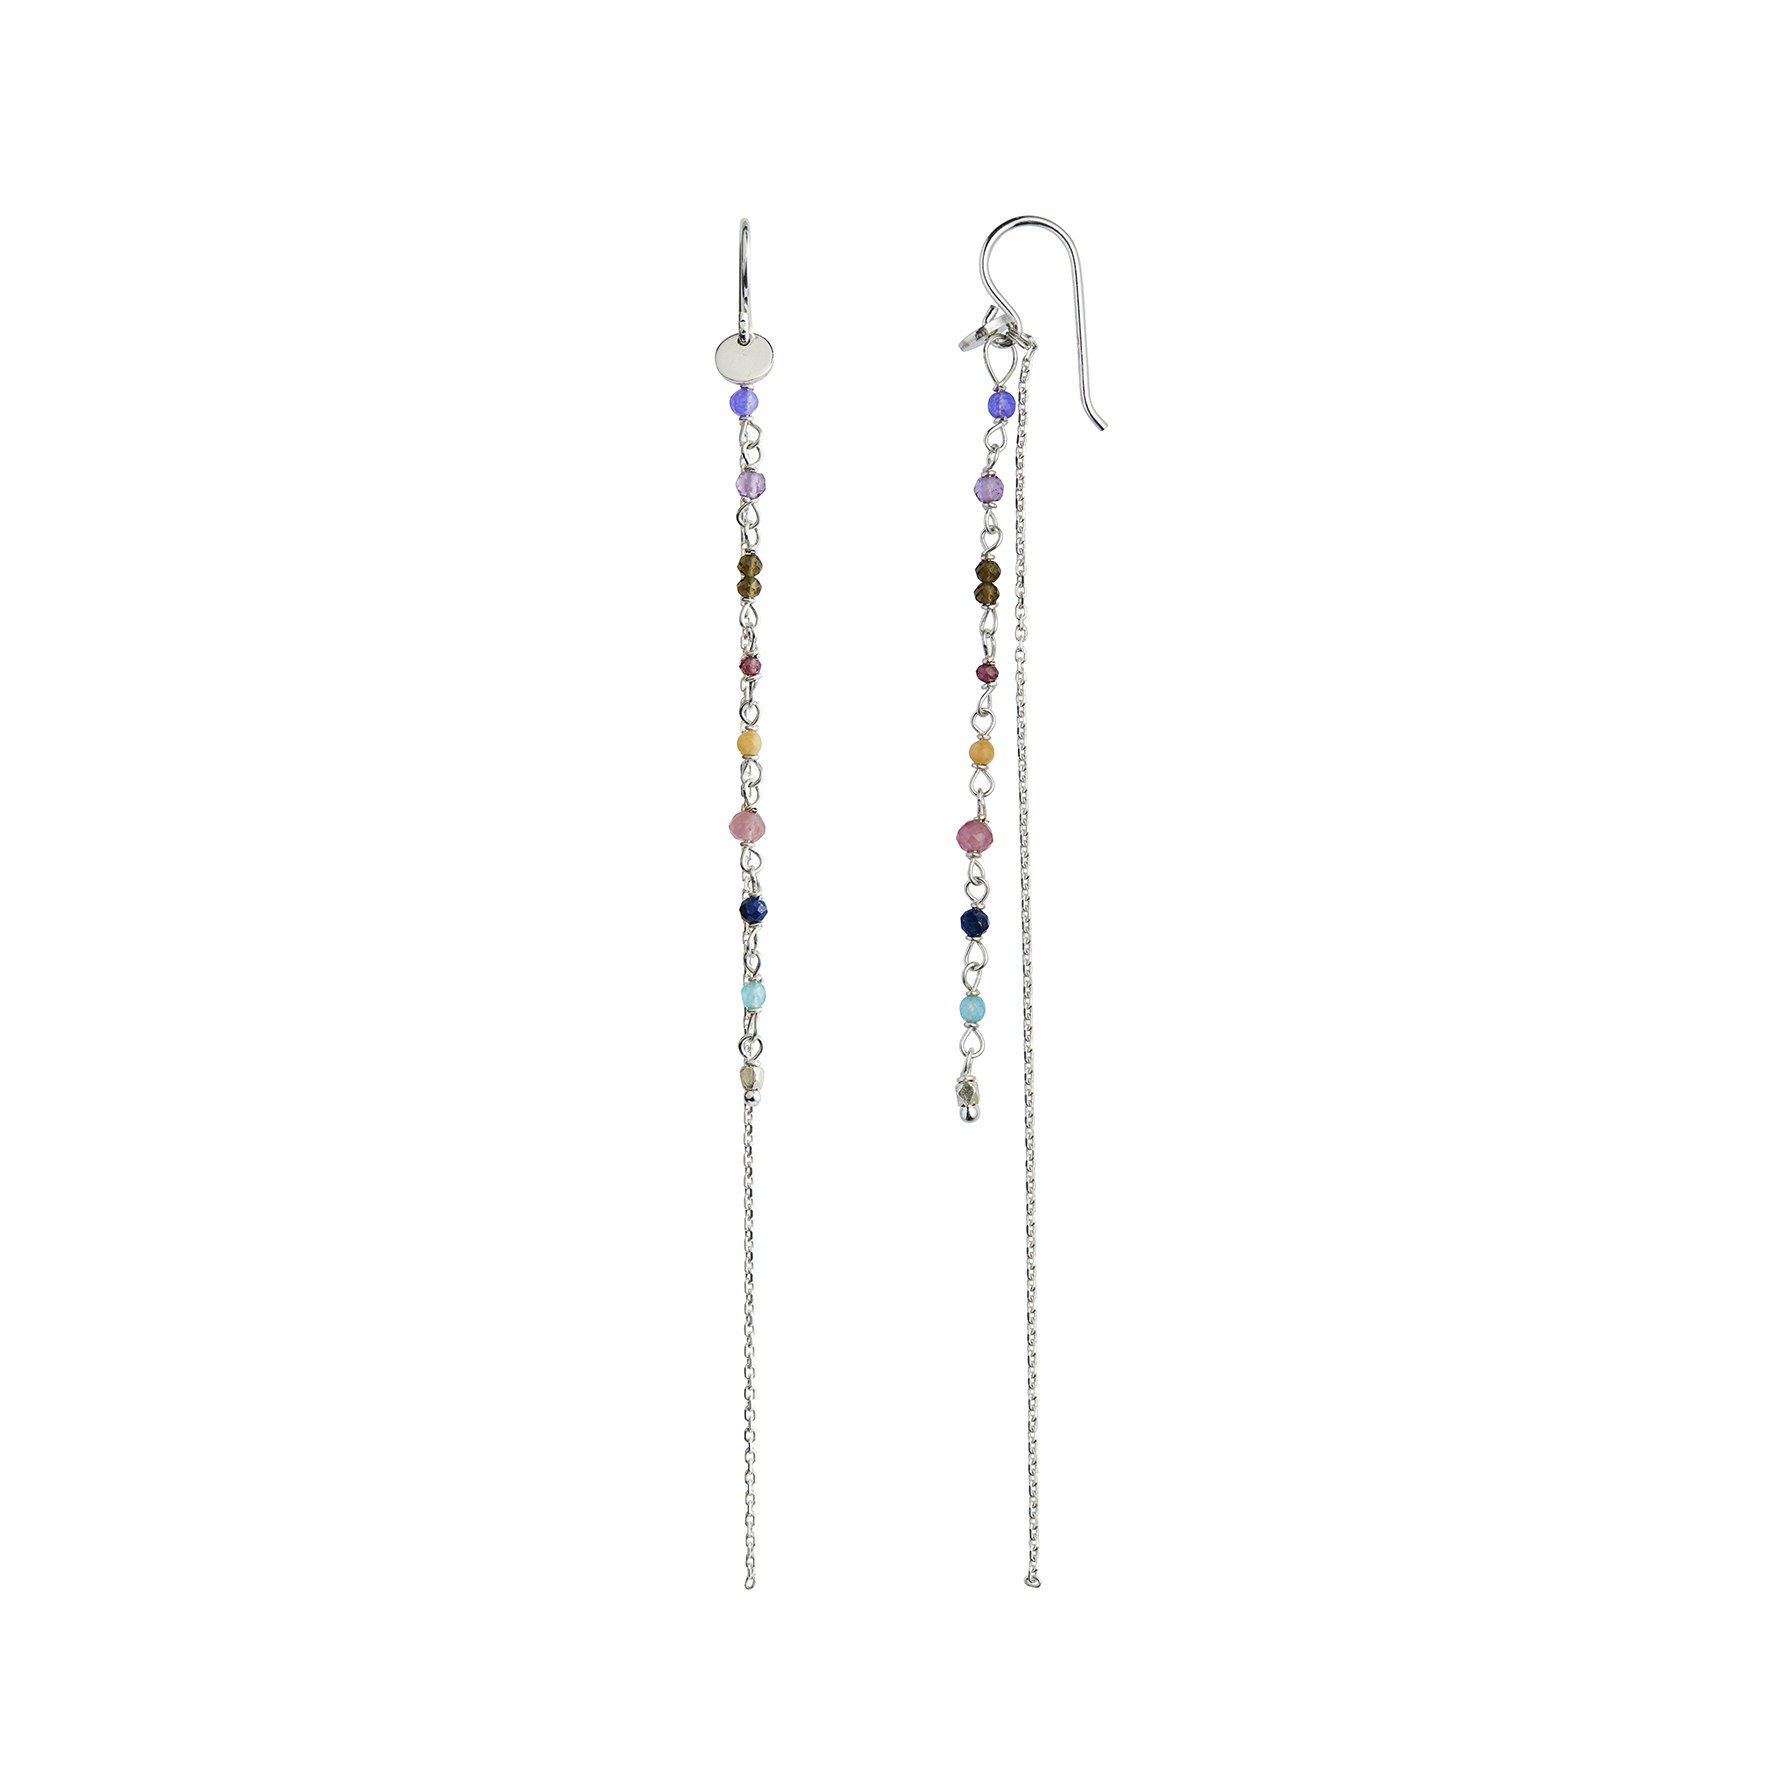 Petit Gemstones Earring With Long Chain - Berry Mix fra STINE A Jewelry i Sølv Sterling 925